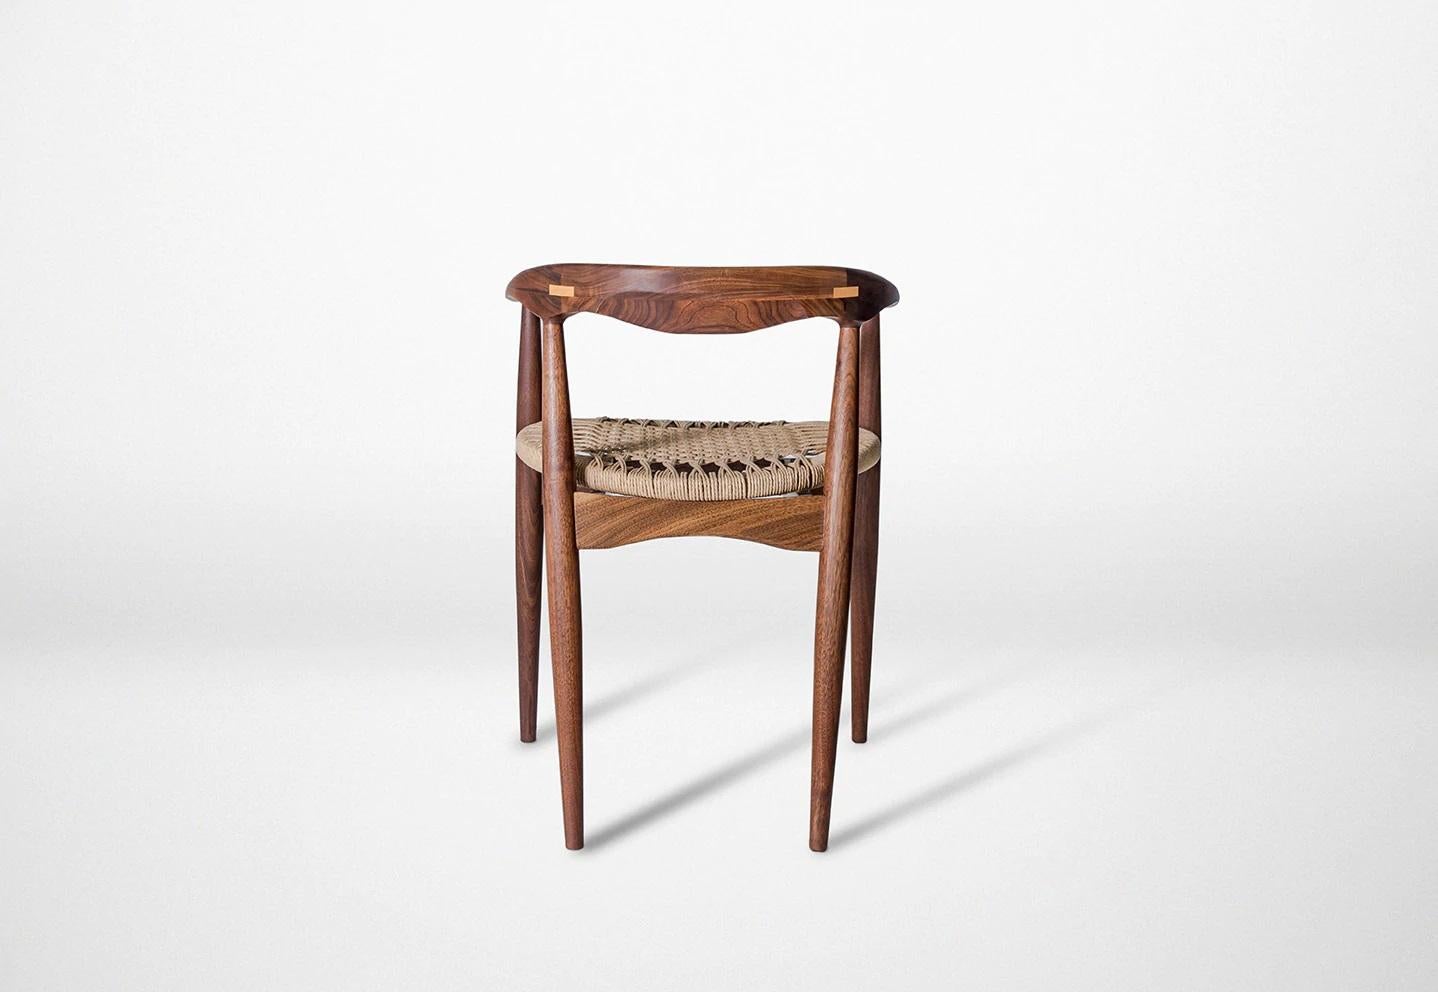 Mexican Korsu Paper Cord Dining Chair by Atra Design